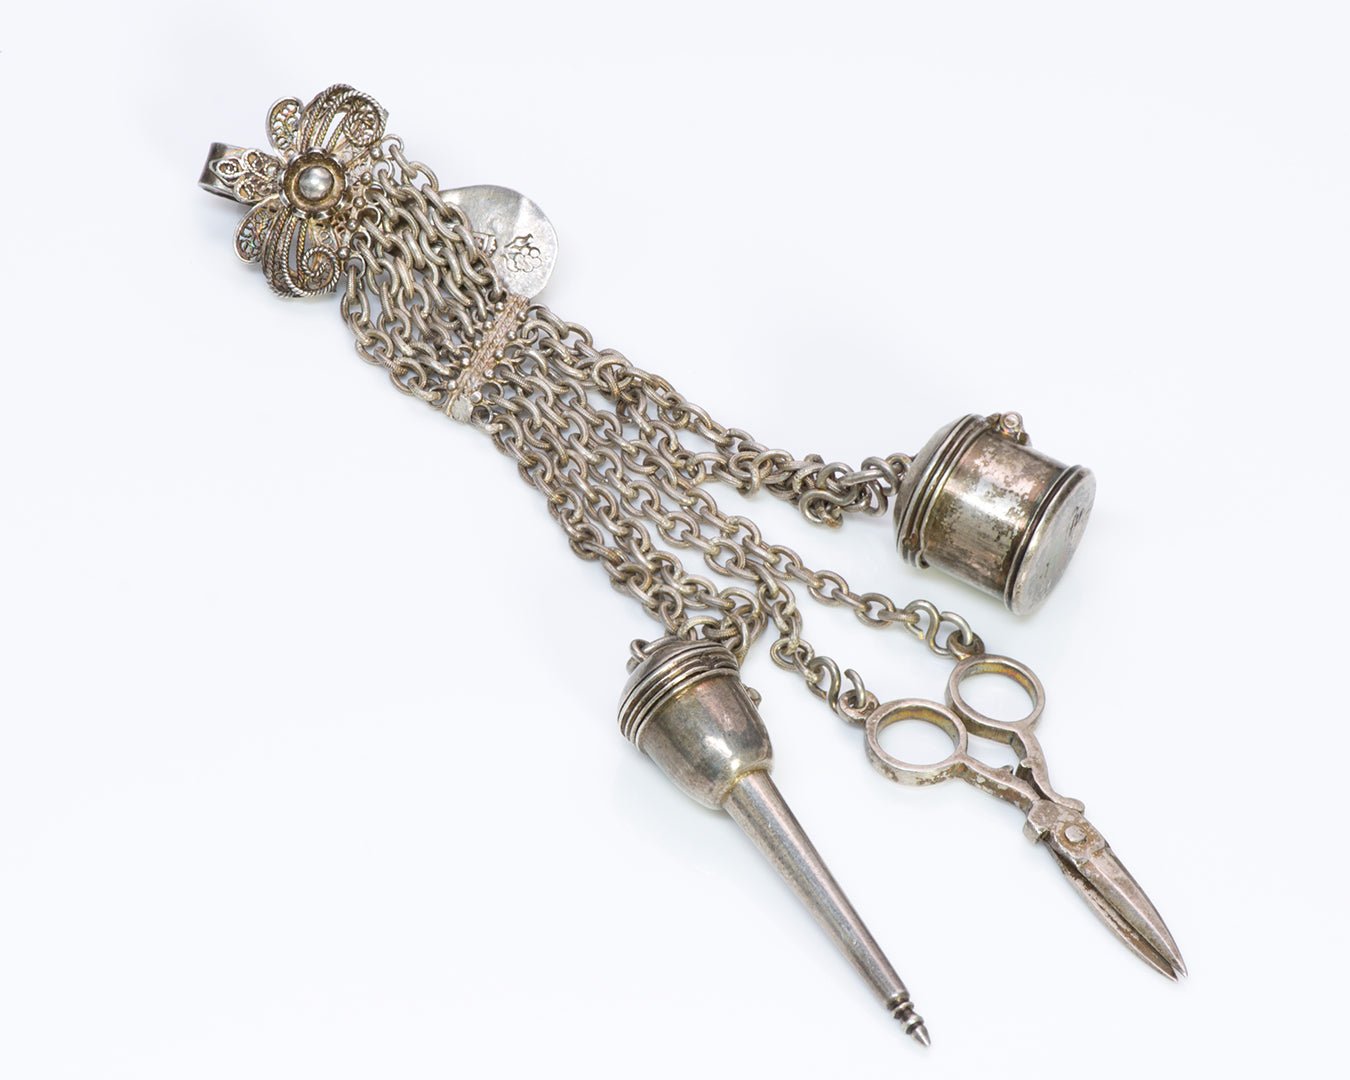 Antique Miniature Silver Chatelaine Sawing Items - DSF Antique Jewelry